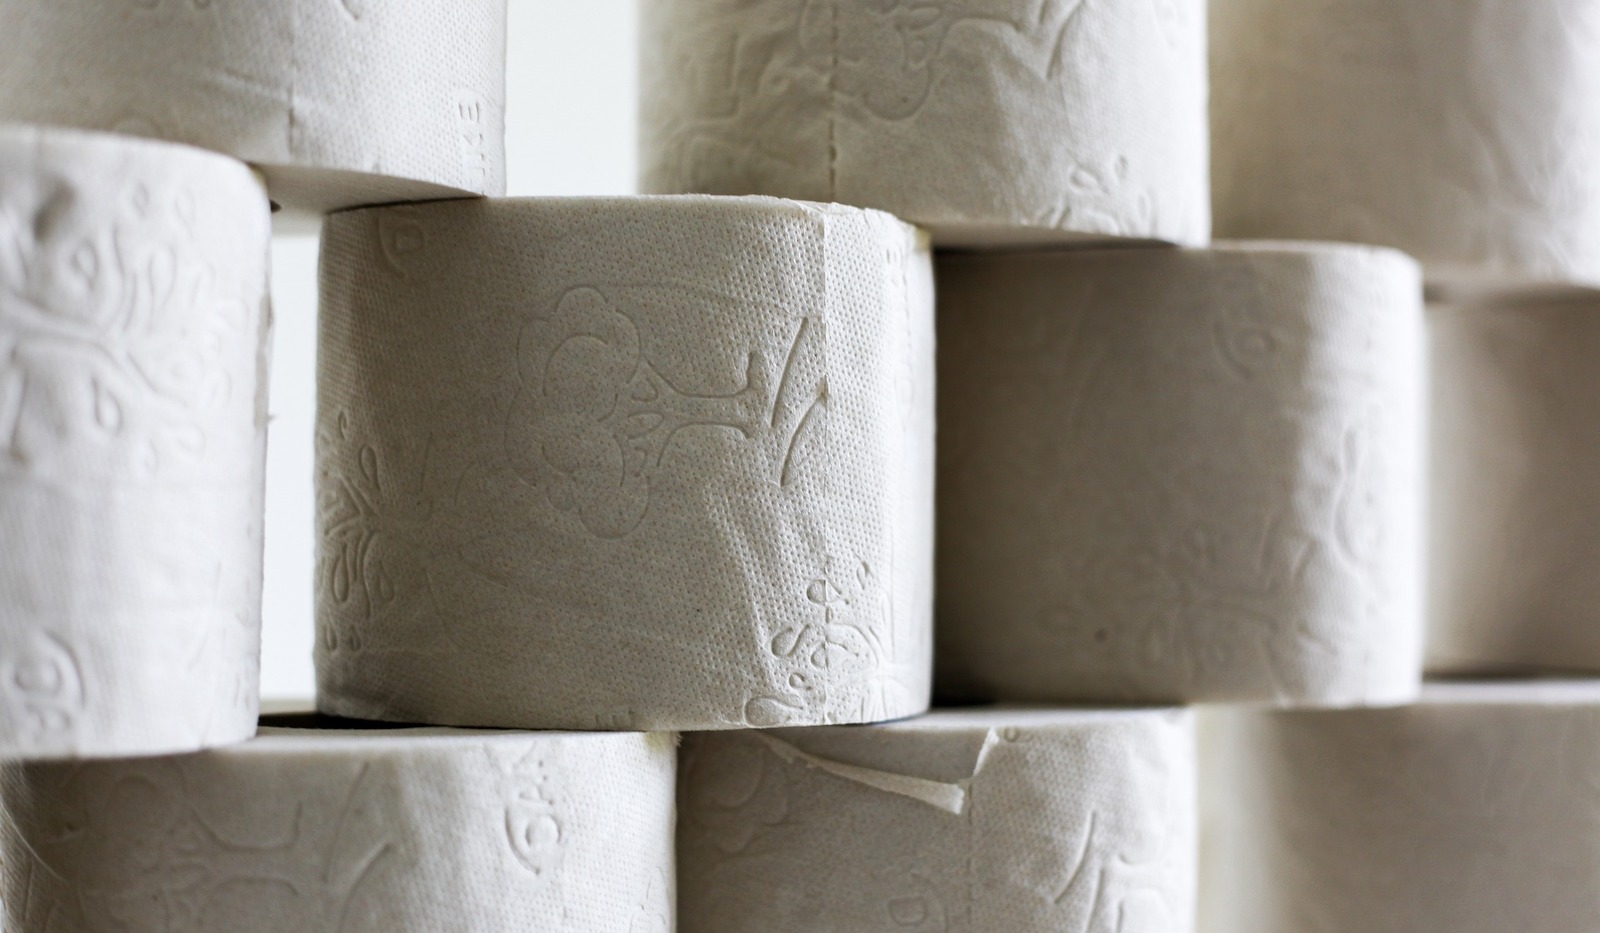 The Impact of Toilet Paper: Which Type of Bathroom Tissue Is The